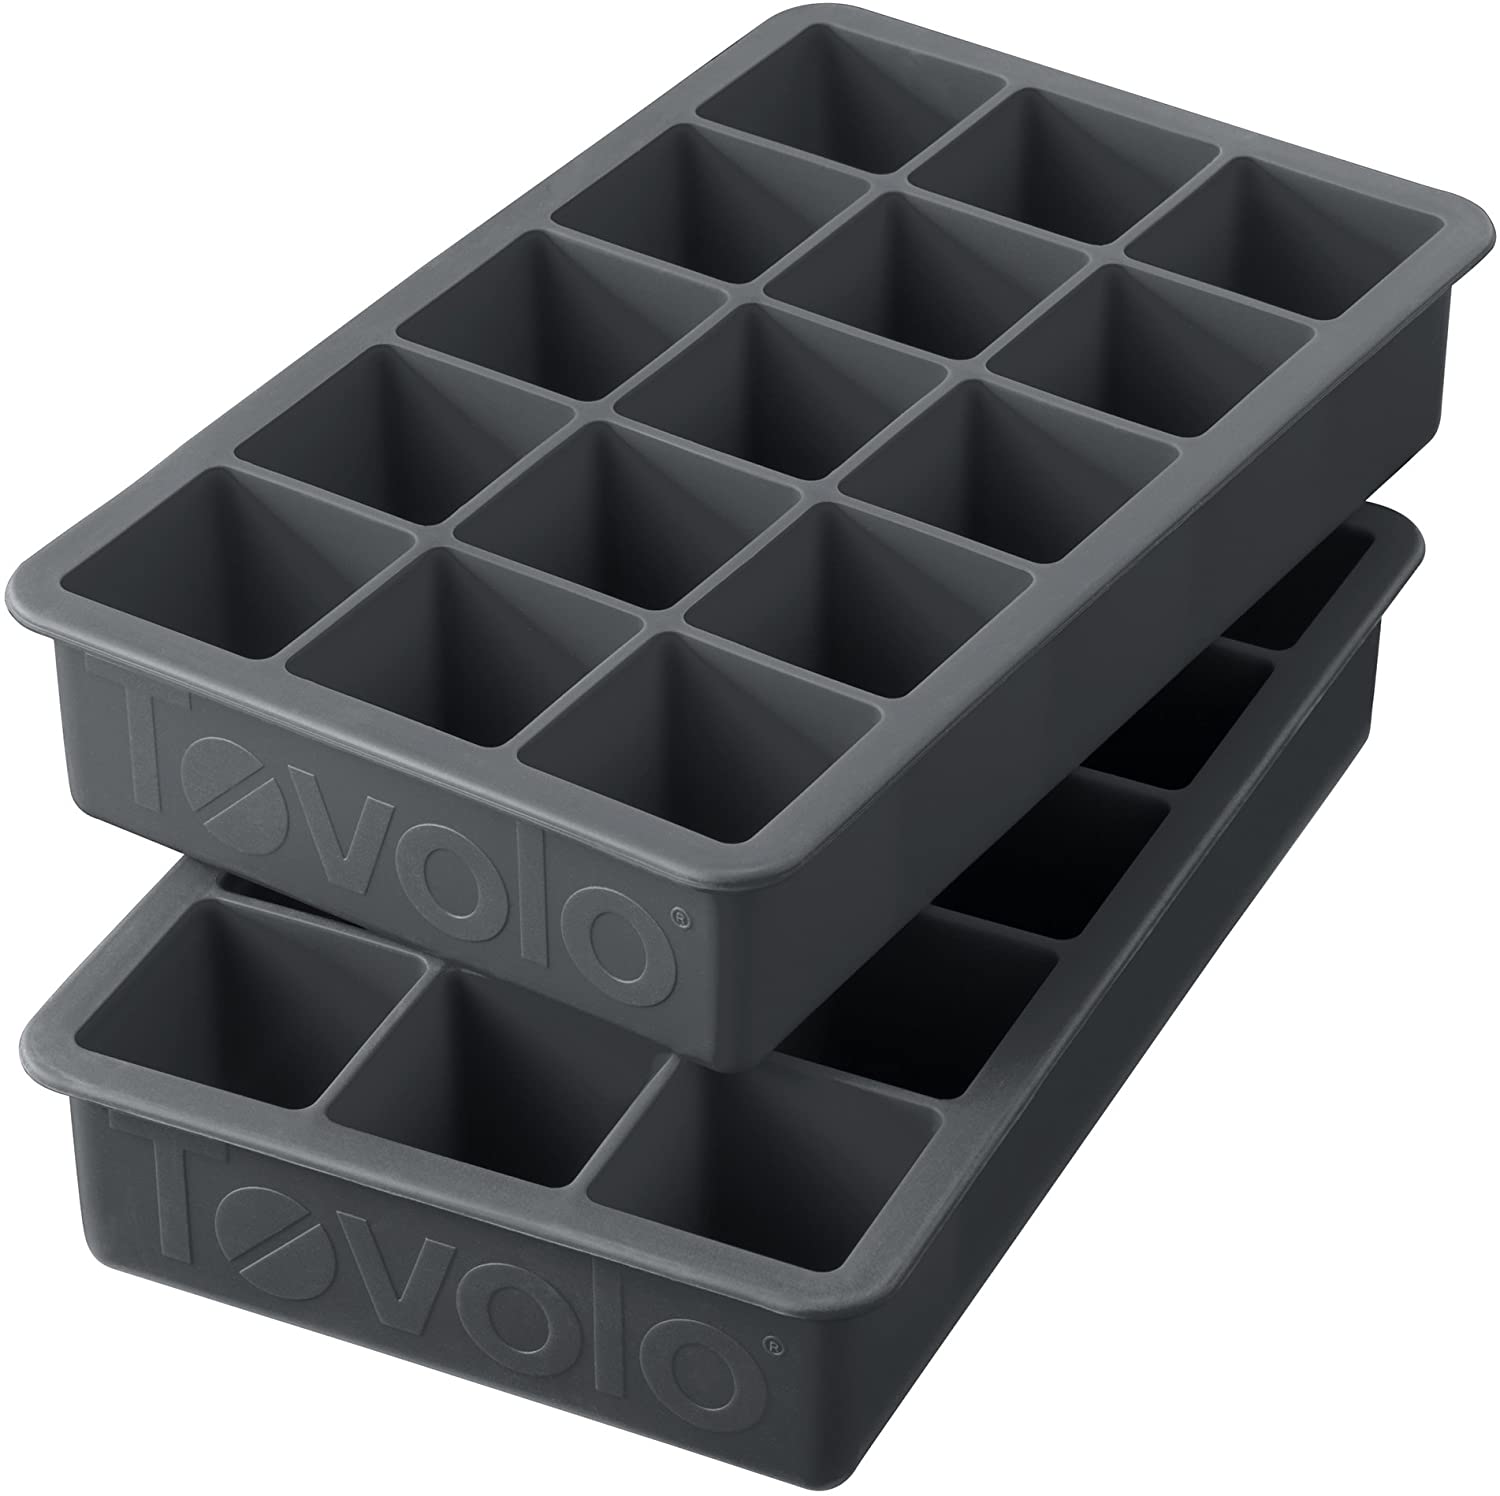 Tovolo Perfect Cube Ice Tray, Set of 2